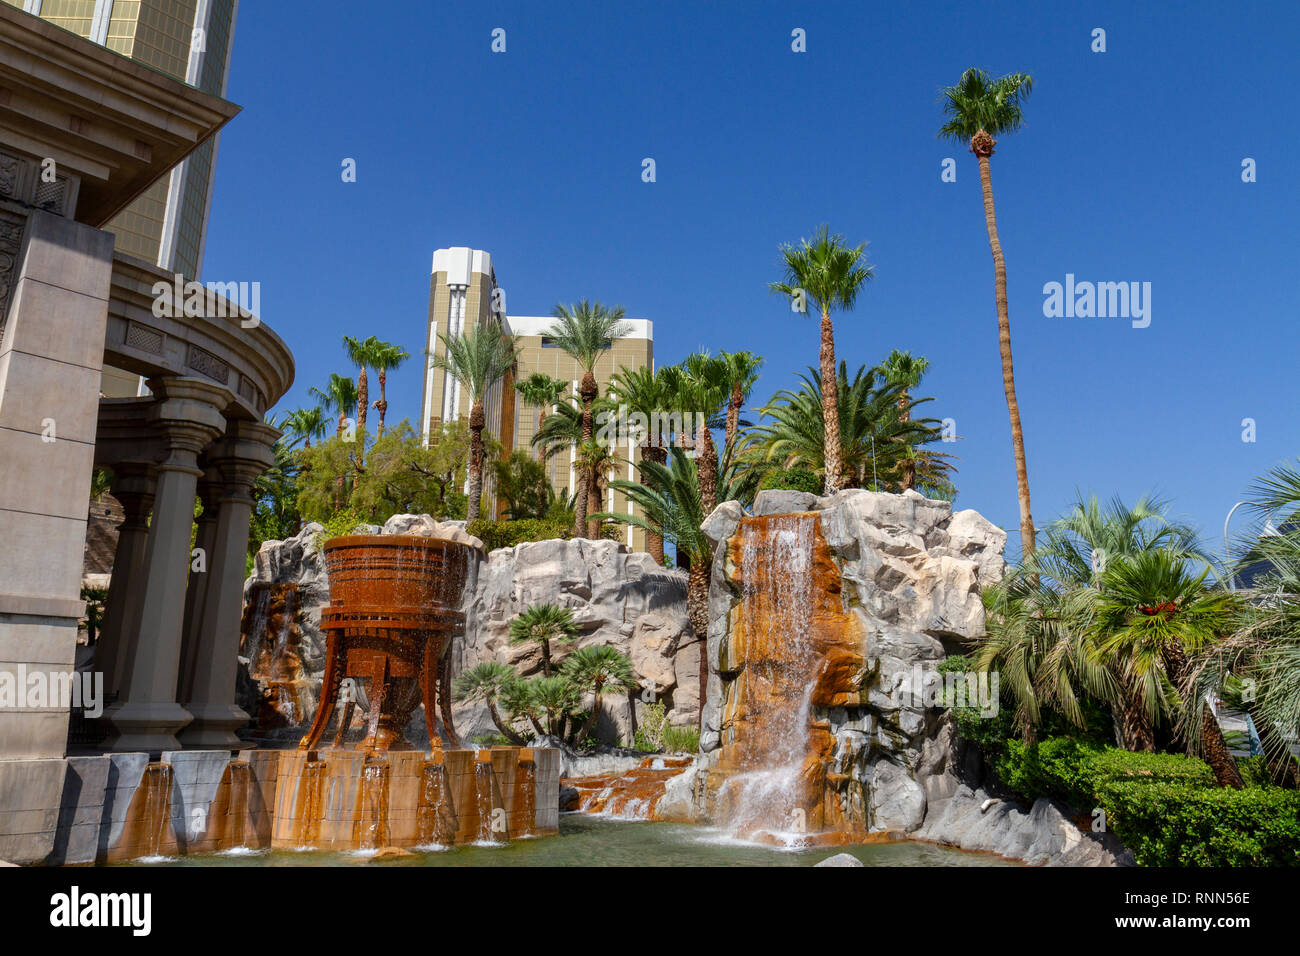 Fountain in front of Mandalay Bay Resort and Casino, Las Vegas (City of Las Vegas), Nevada, United States. Stock Photo